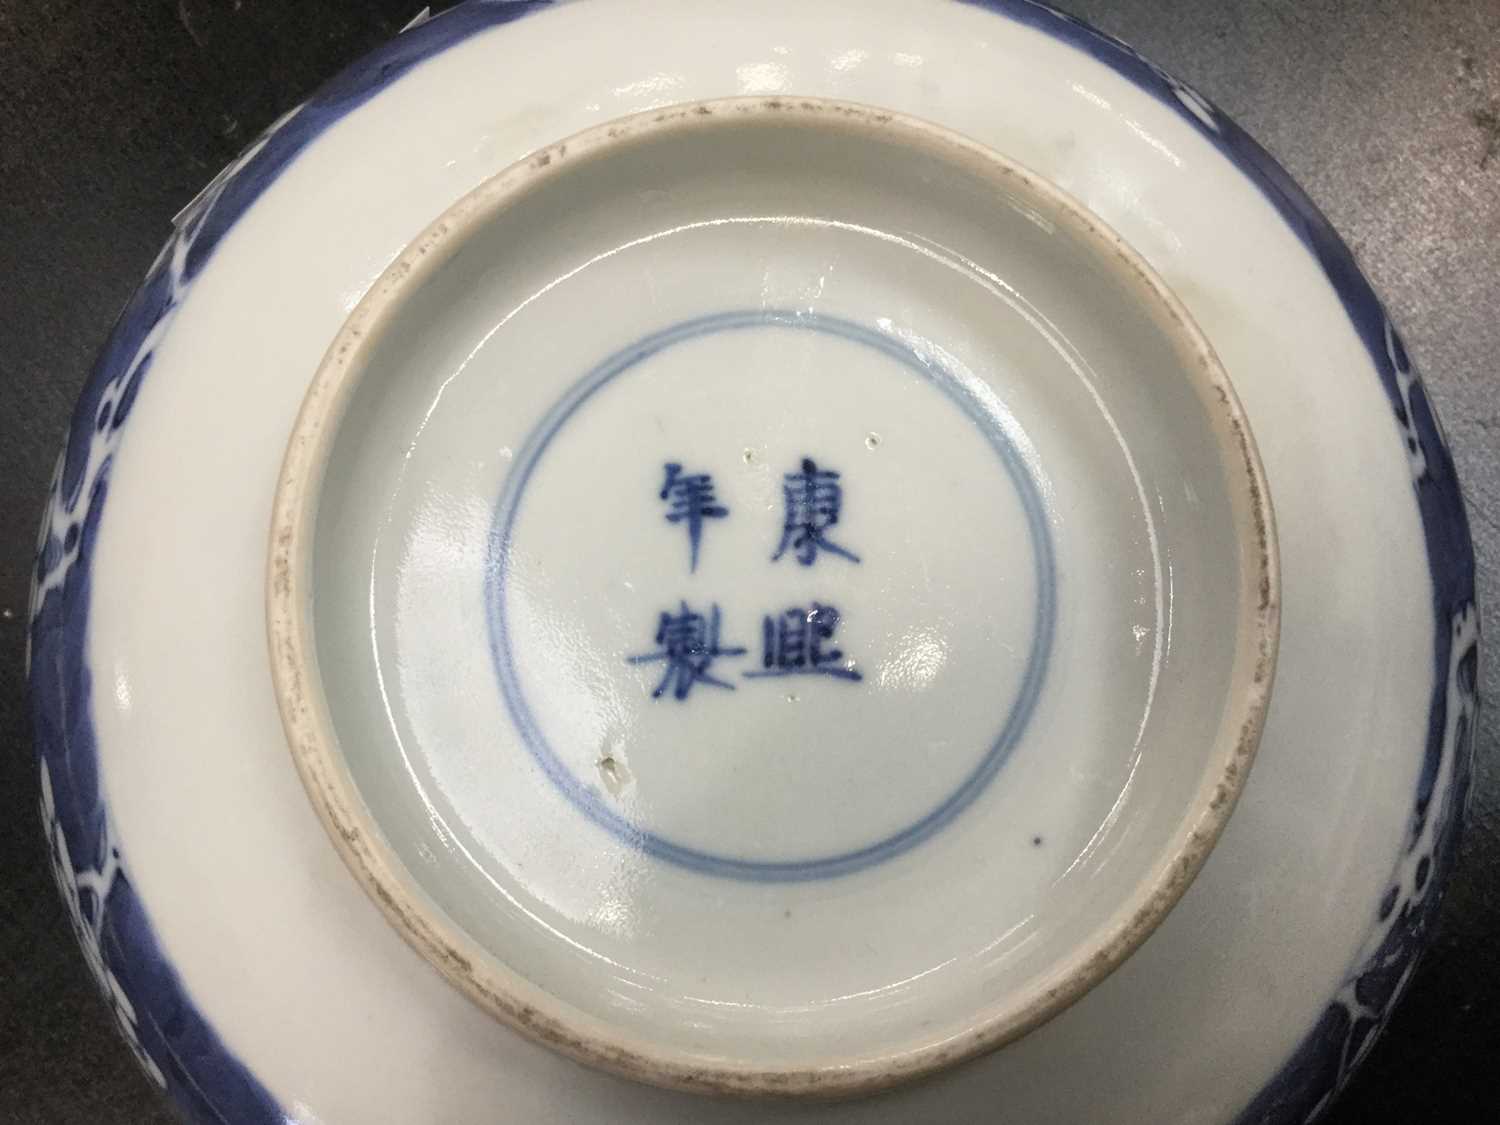 Lot 150 - 19th century Chinese porcelain bowl with prunus decoration on crushed ice ground, double ring and character marks to base